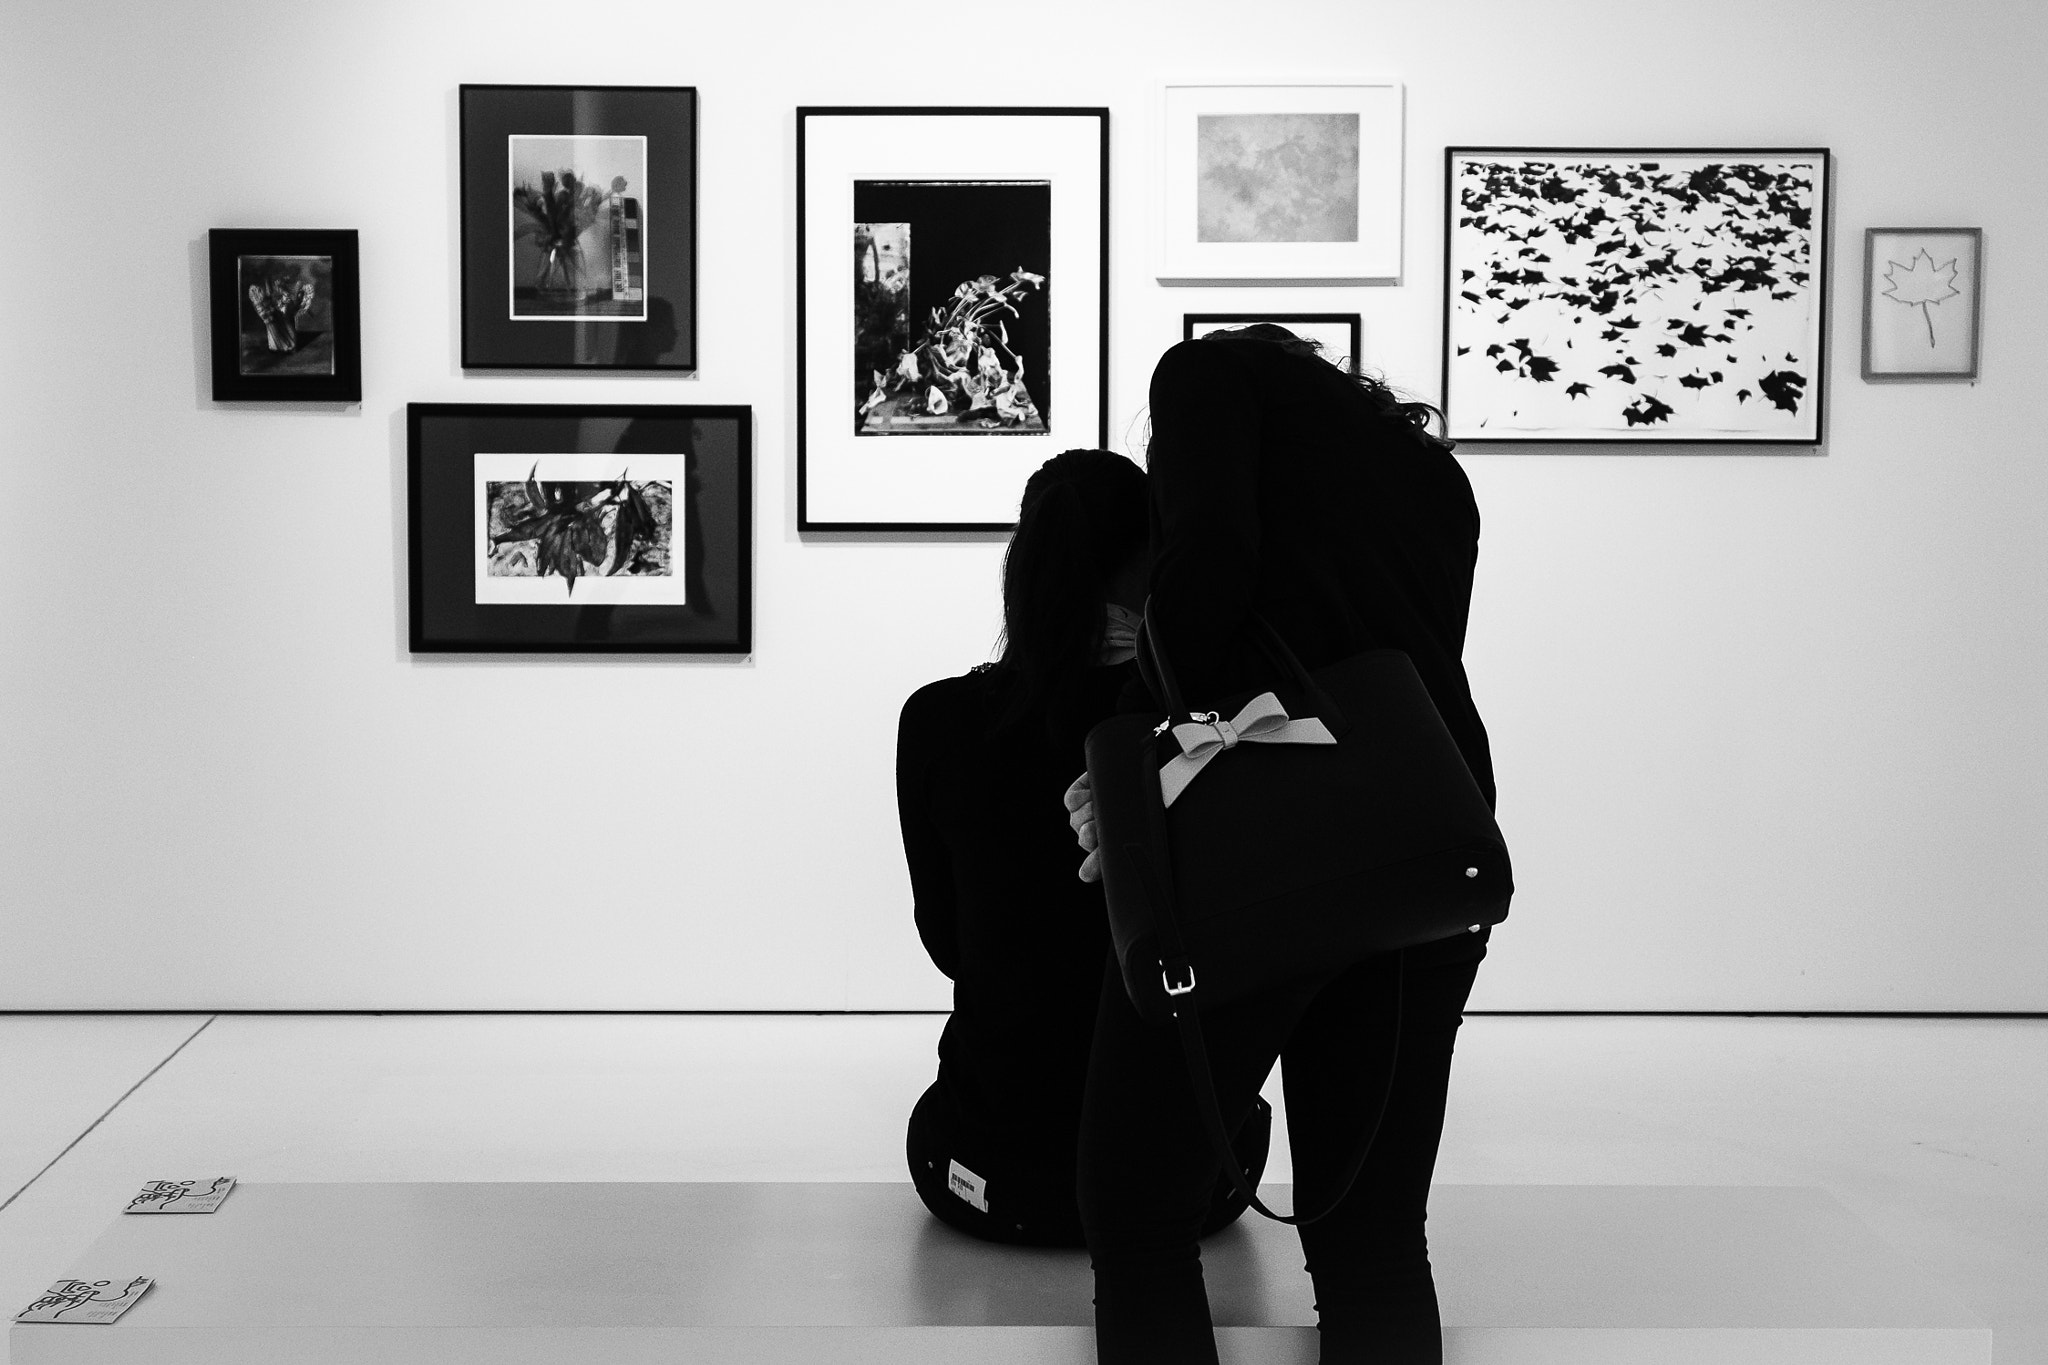 Fujifilm X-Pro1 sample photo. Two women in gallery photography